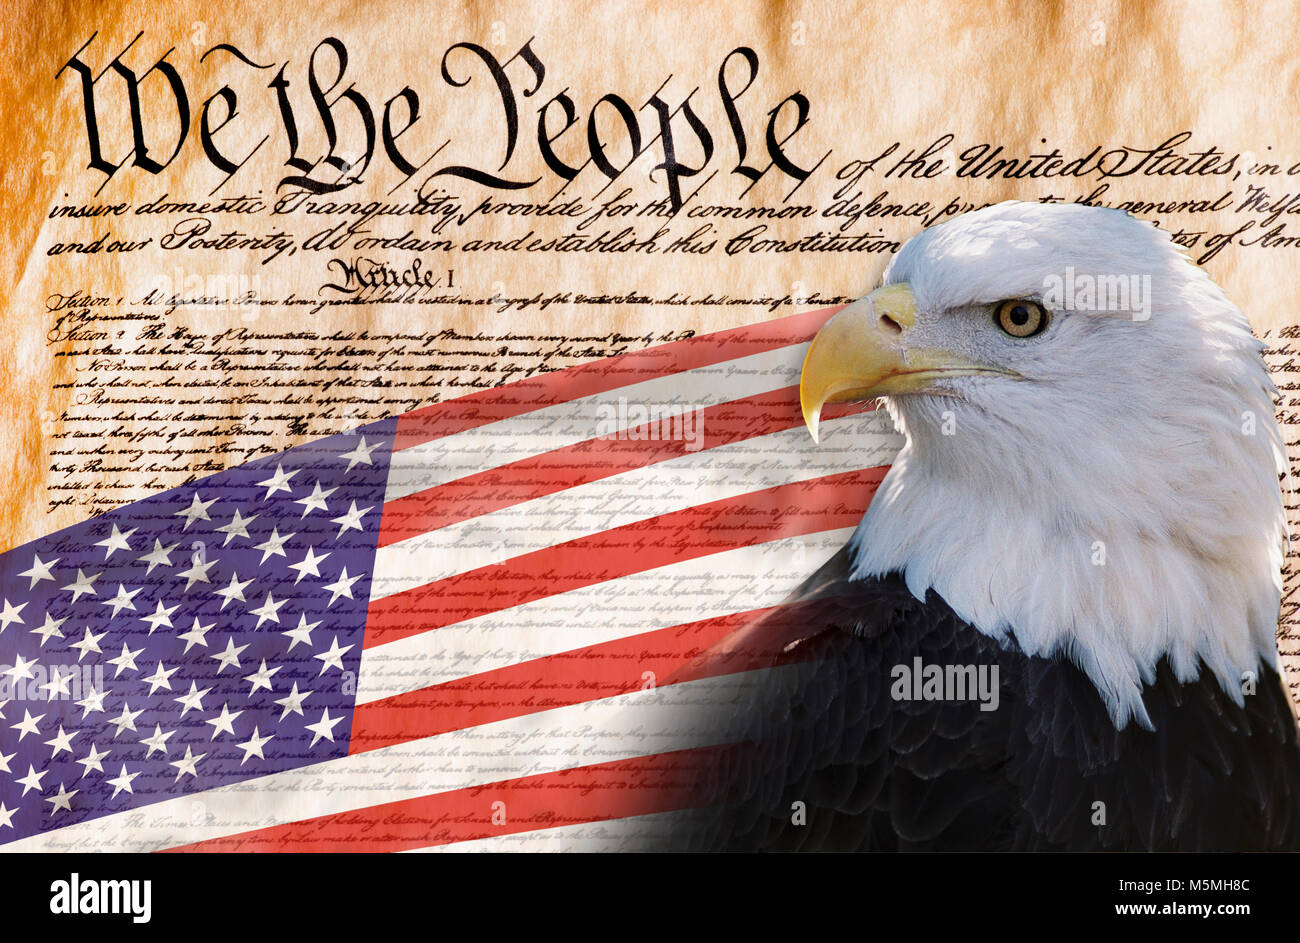 Constitution of America, We the People with bald eagle and American flag. Stock Photo